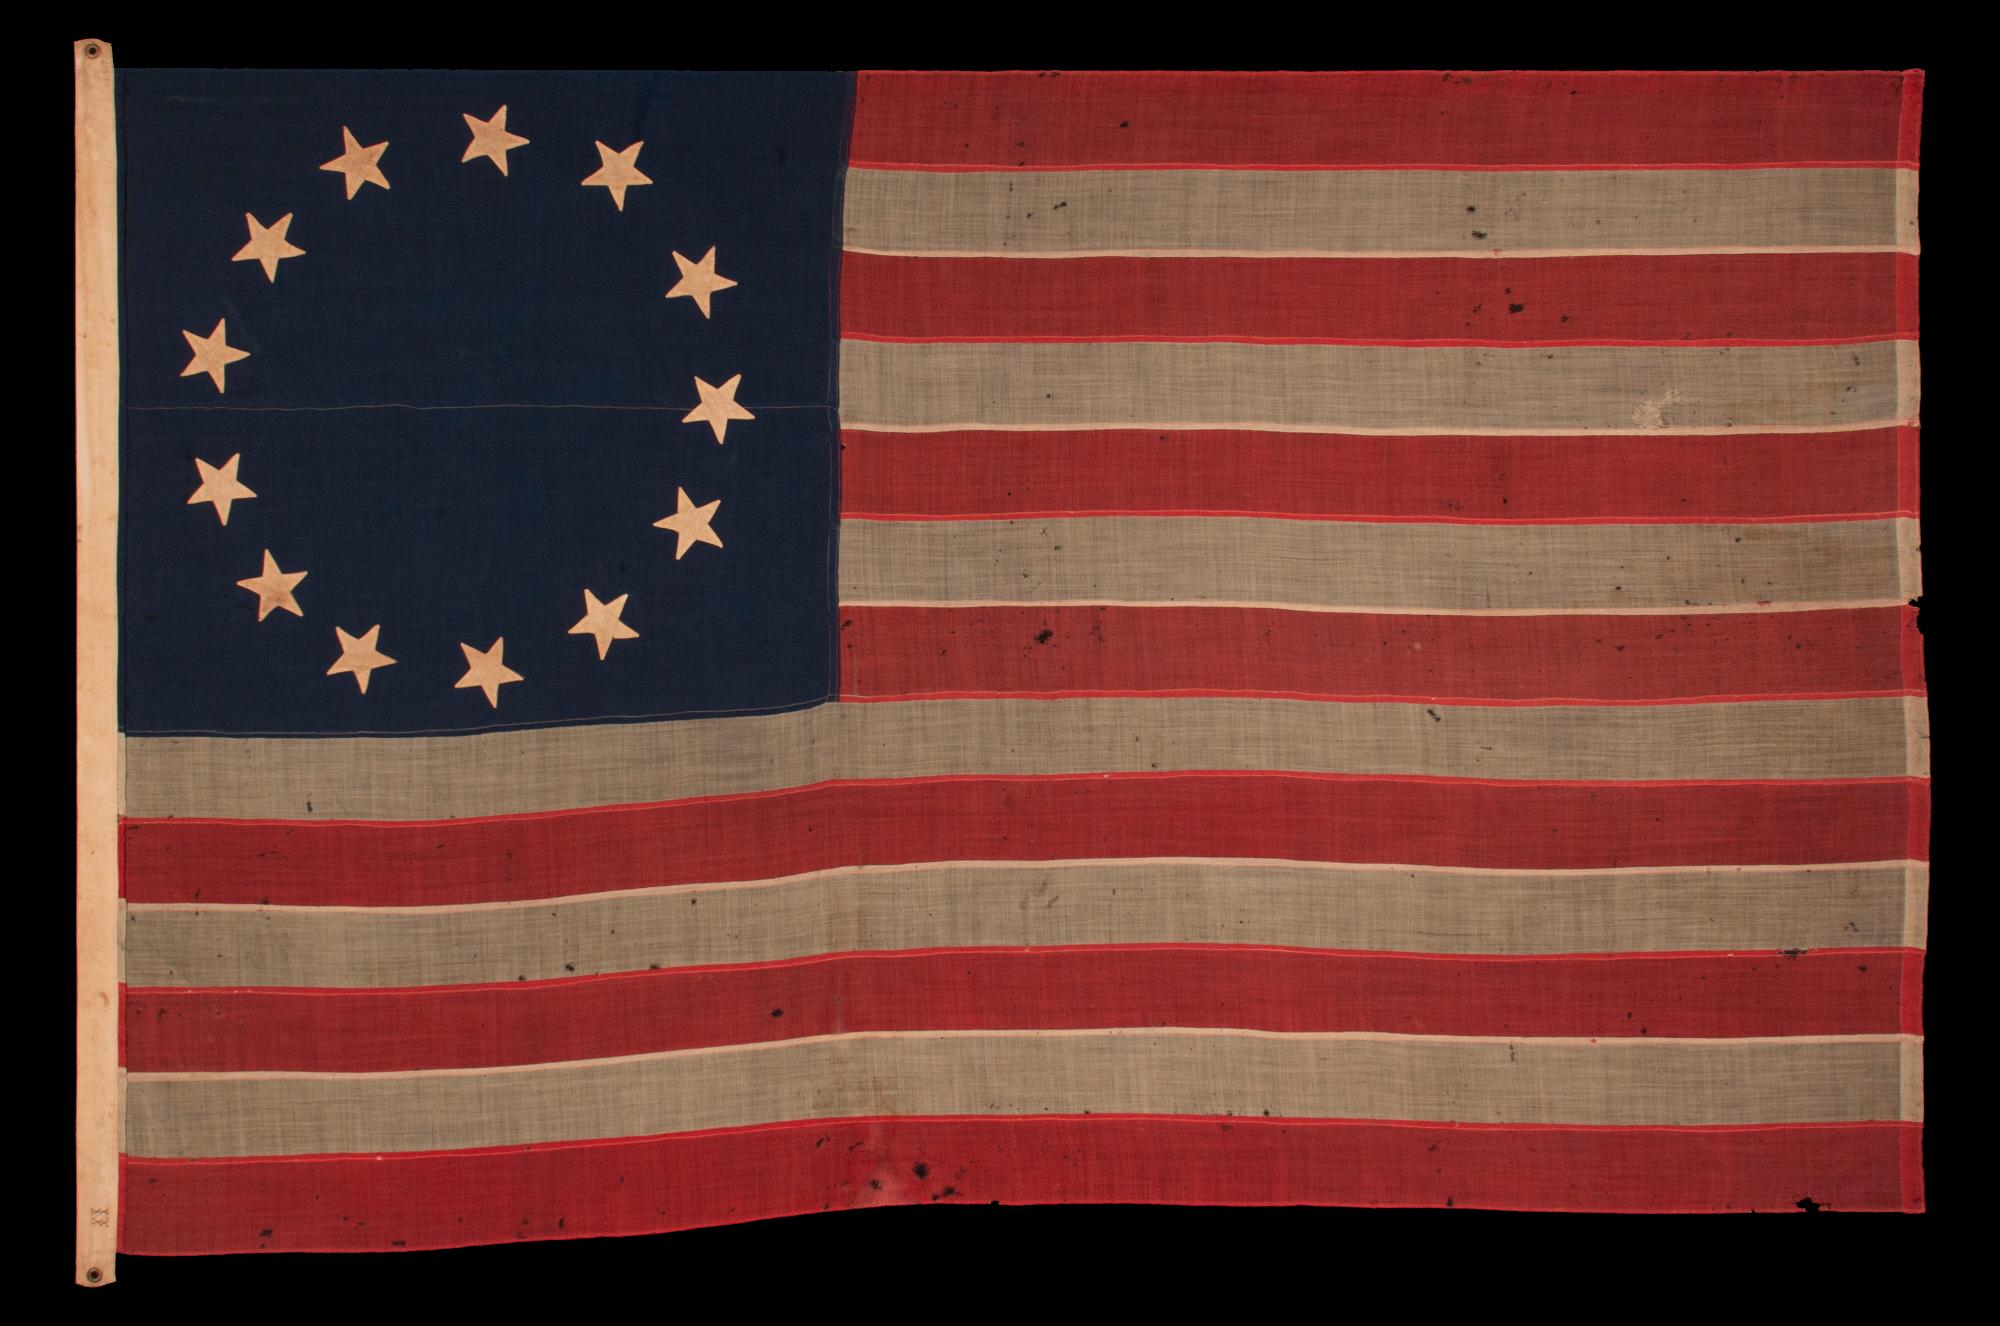 13 star antique American flag in the Betsy Ross pattern, one of just three examples that I have encountered that pre-date the 1890’s; an extraordinary find, civil war period (1861-1865) or just after, extremely large among its counterparts of all